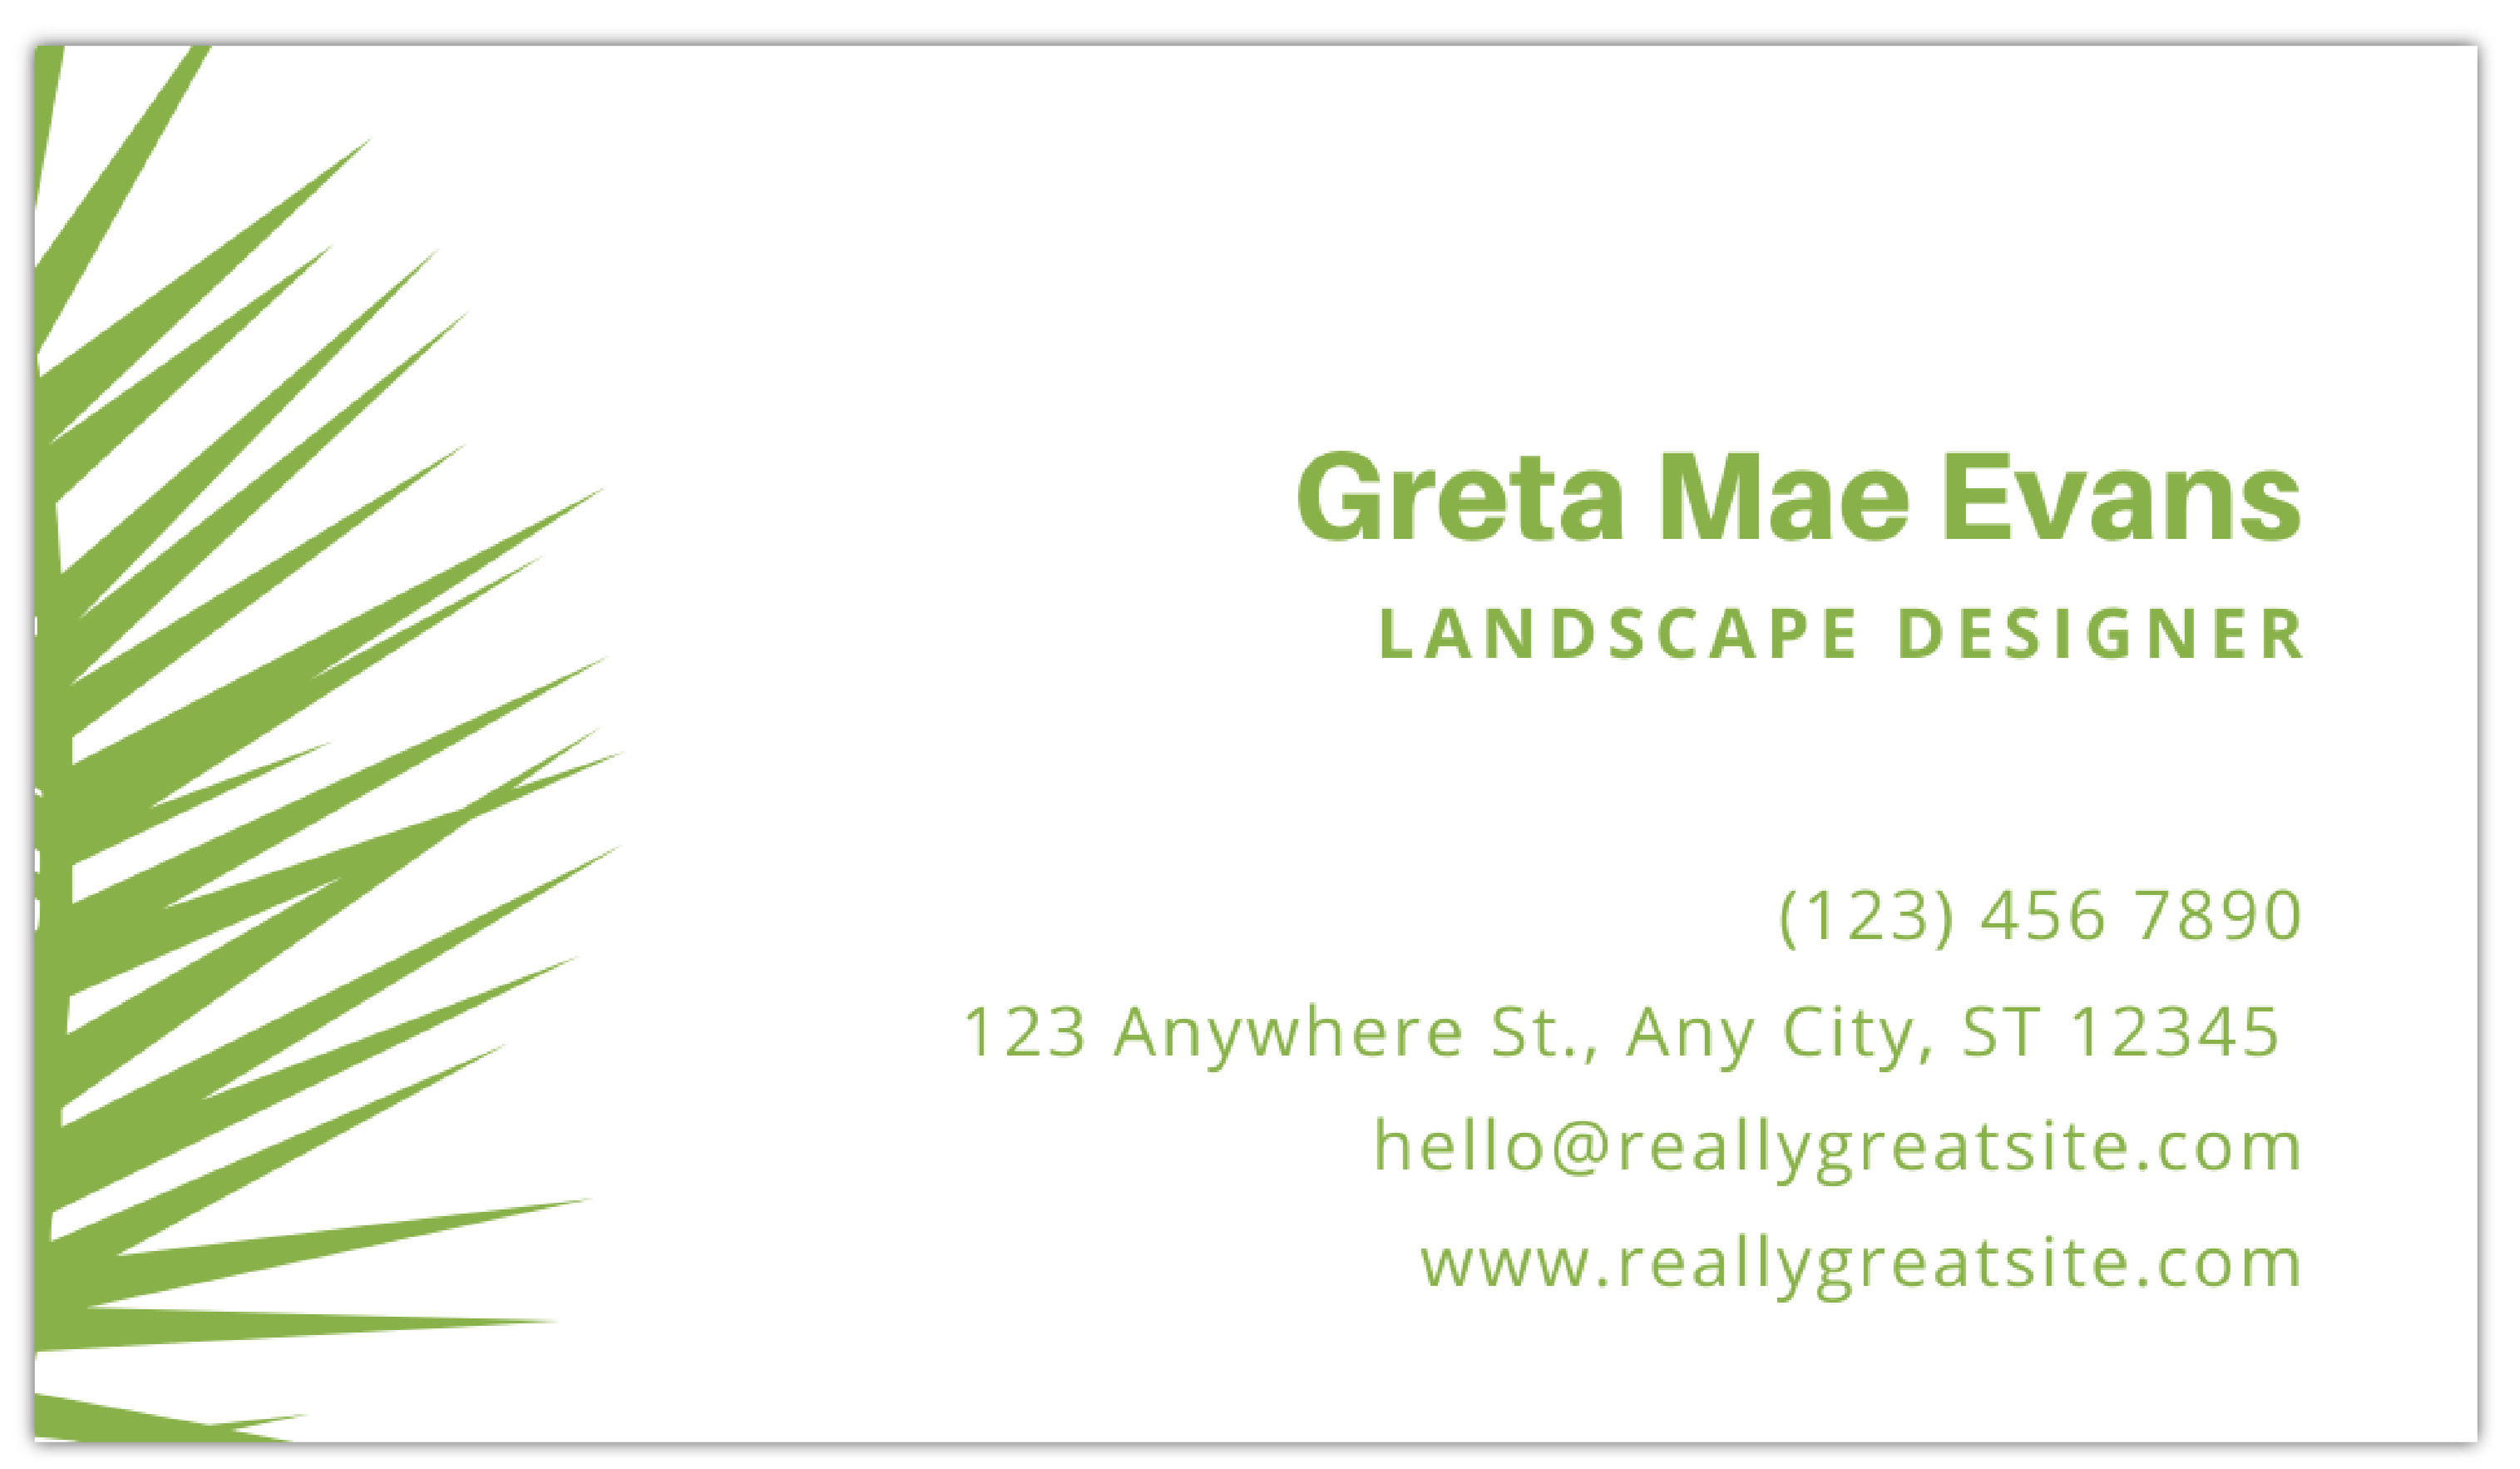 lawn service business cards templates